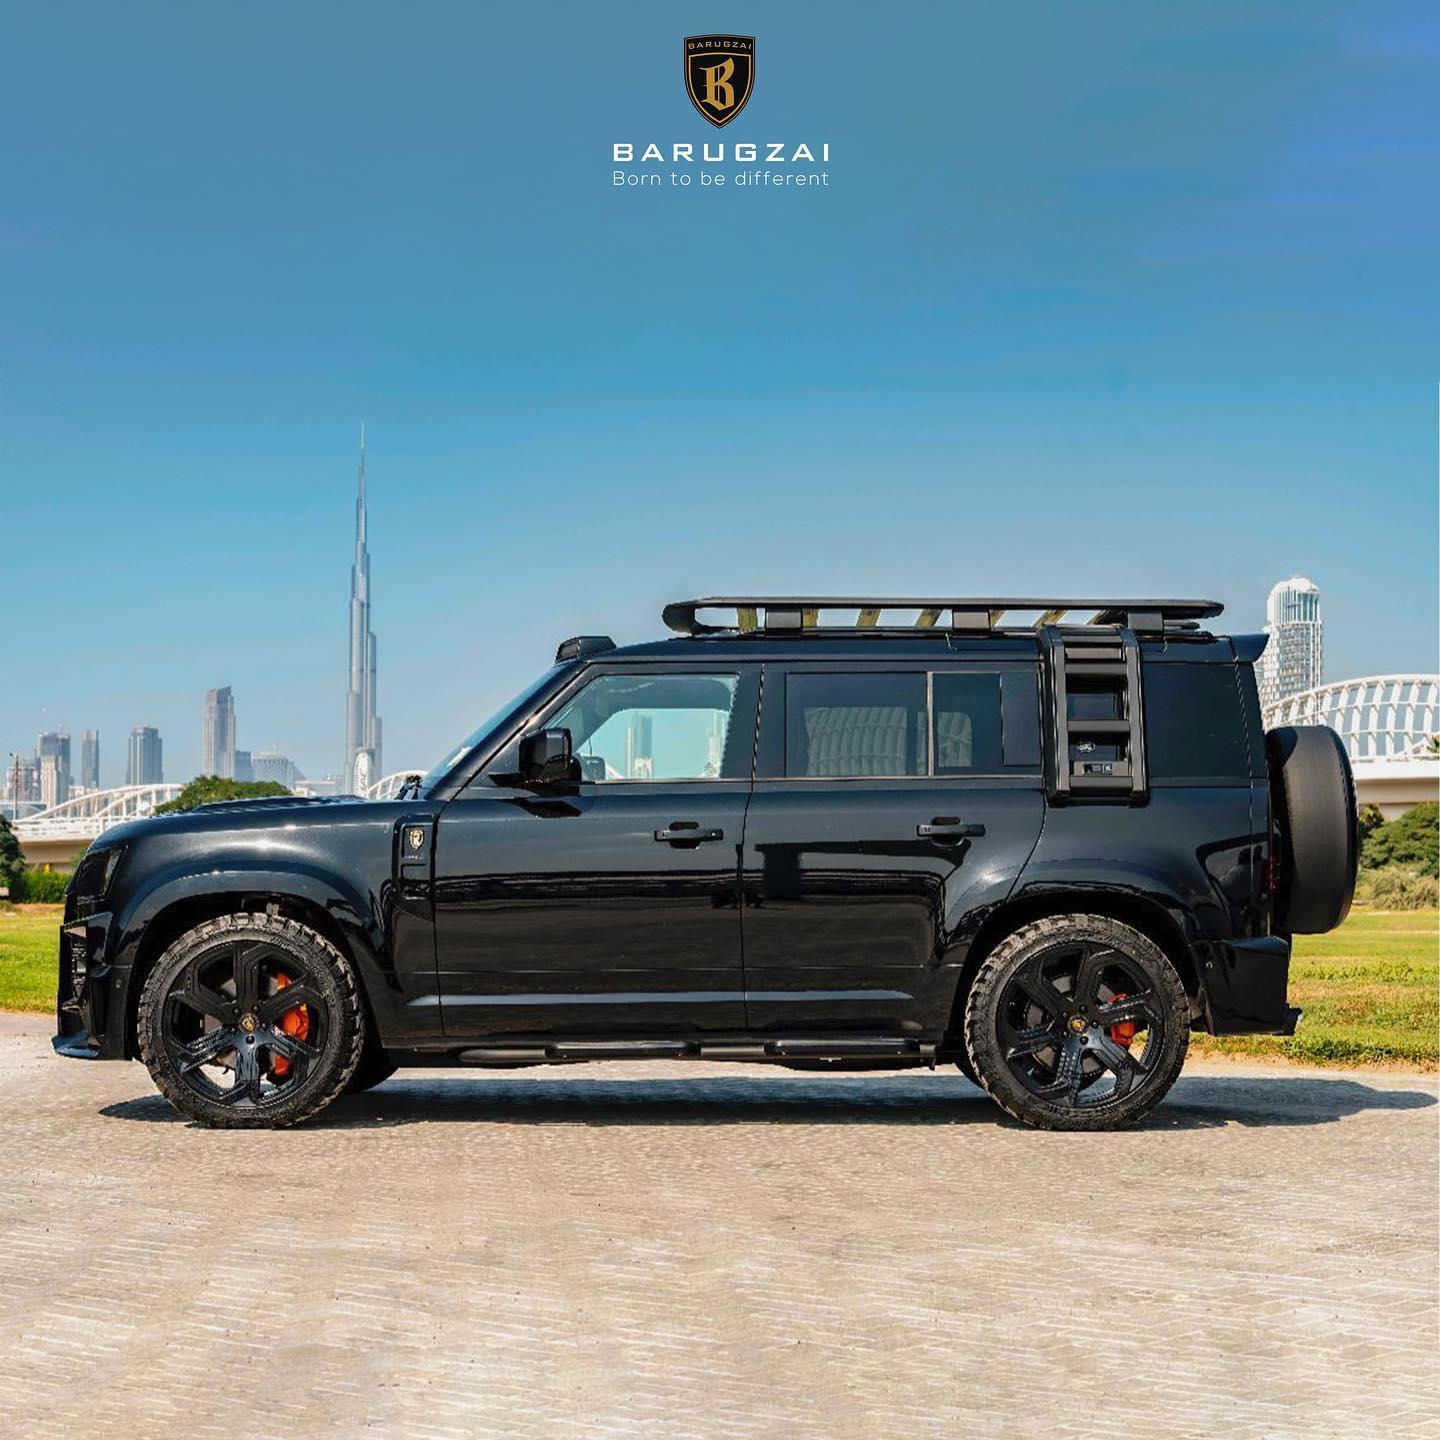 Check our price and buy Barugzai Falcon body kit for Land Rover Defender